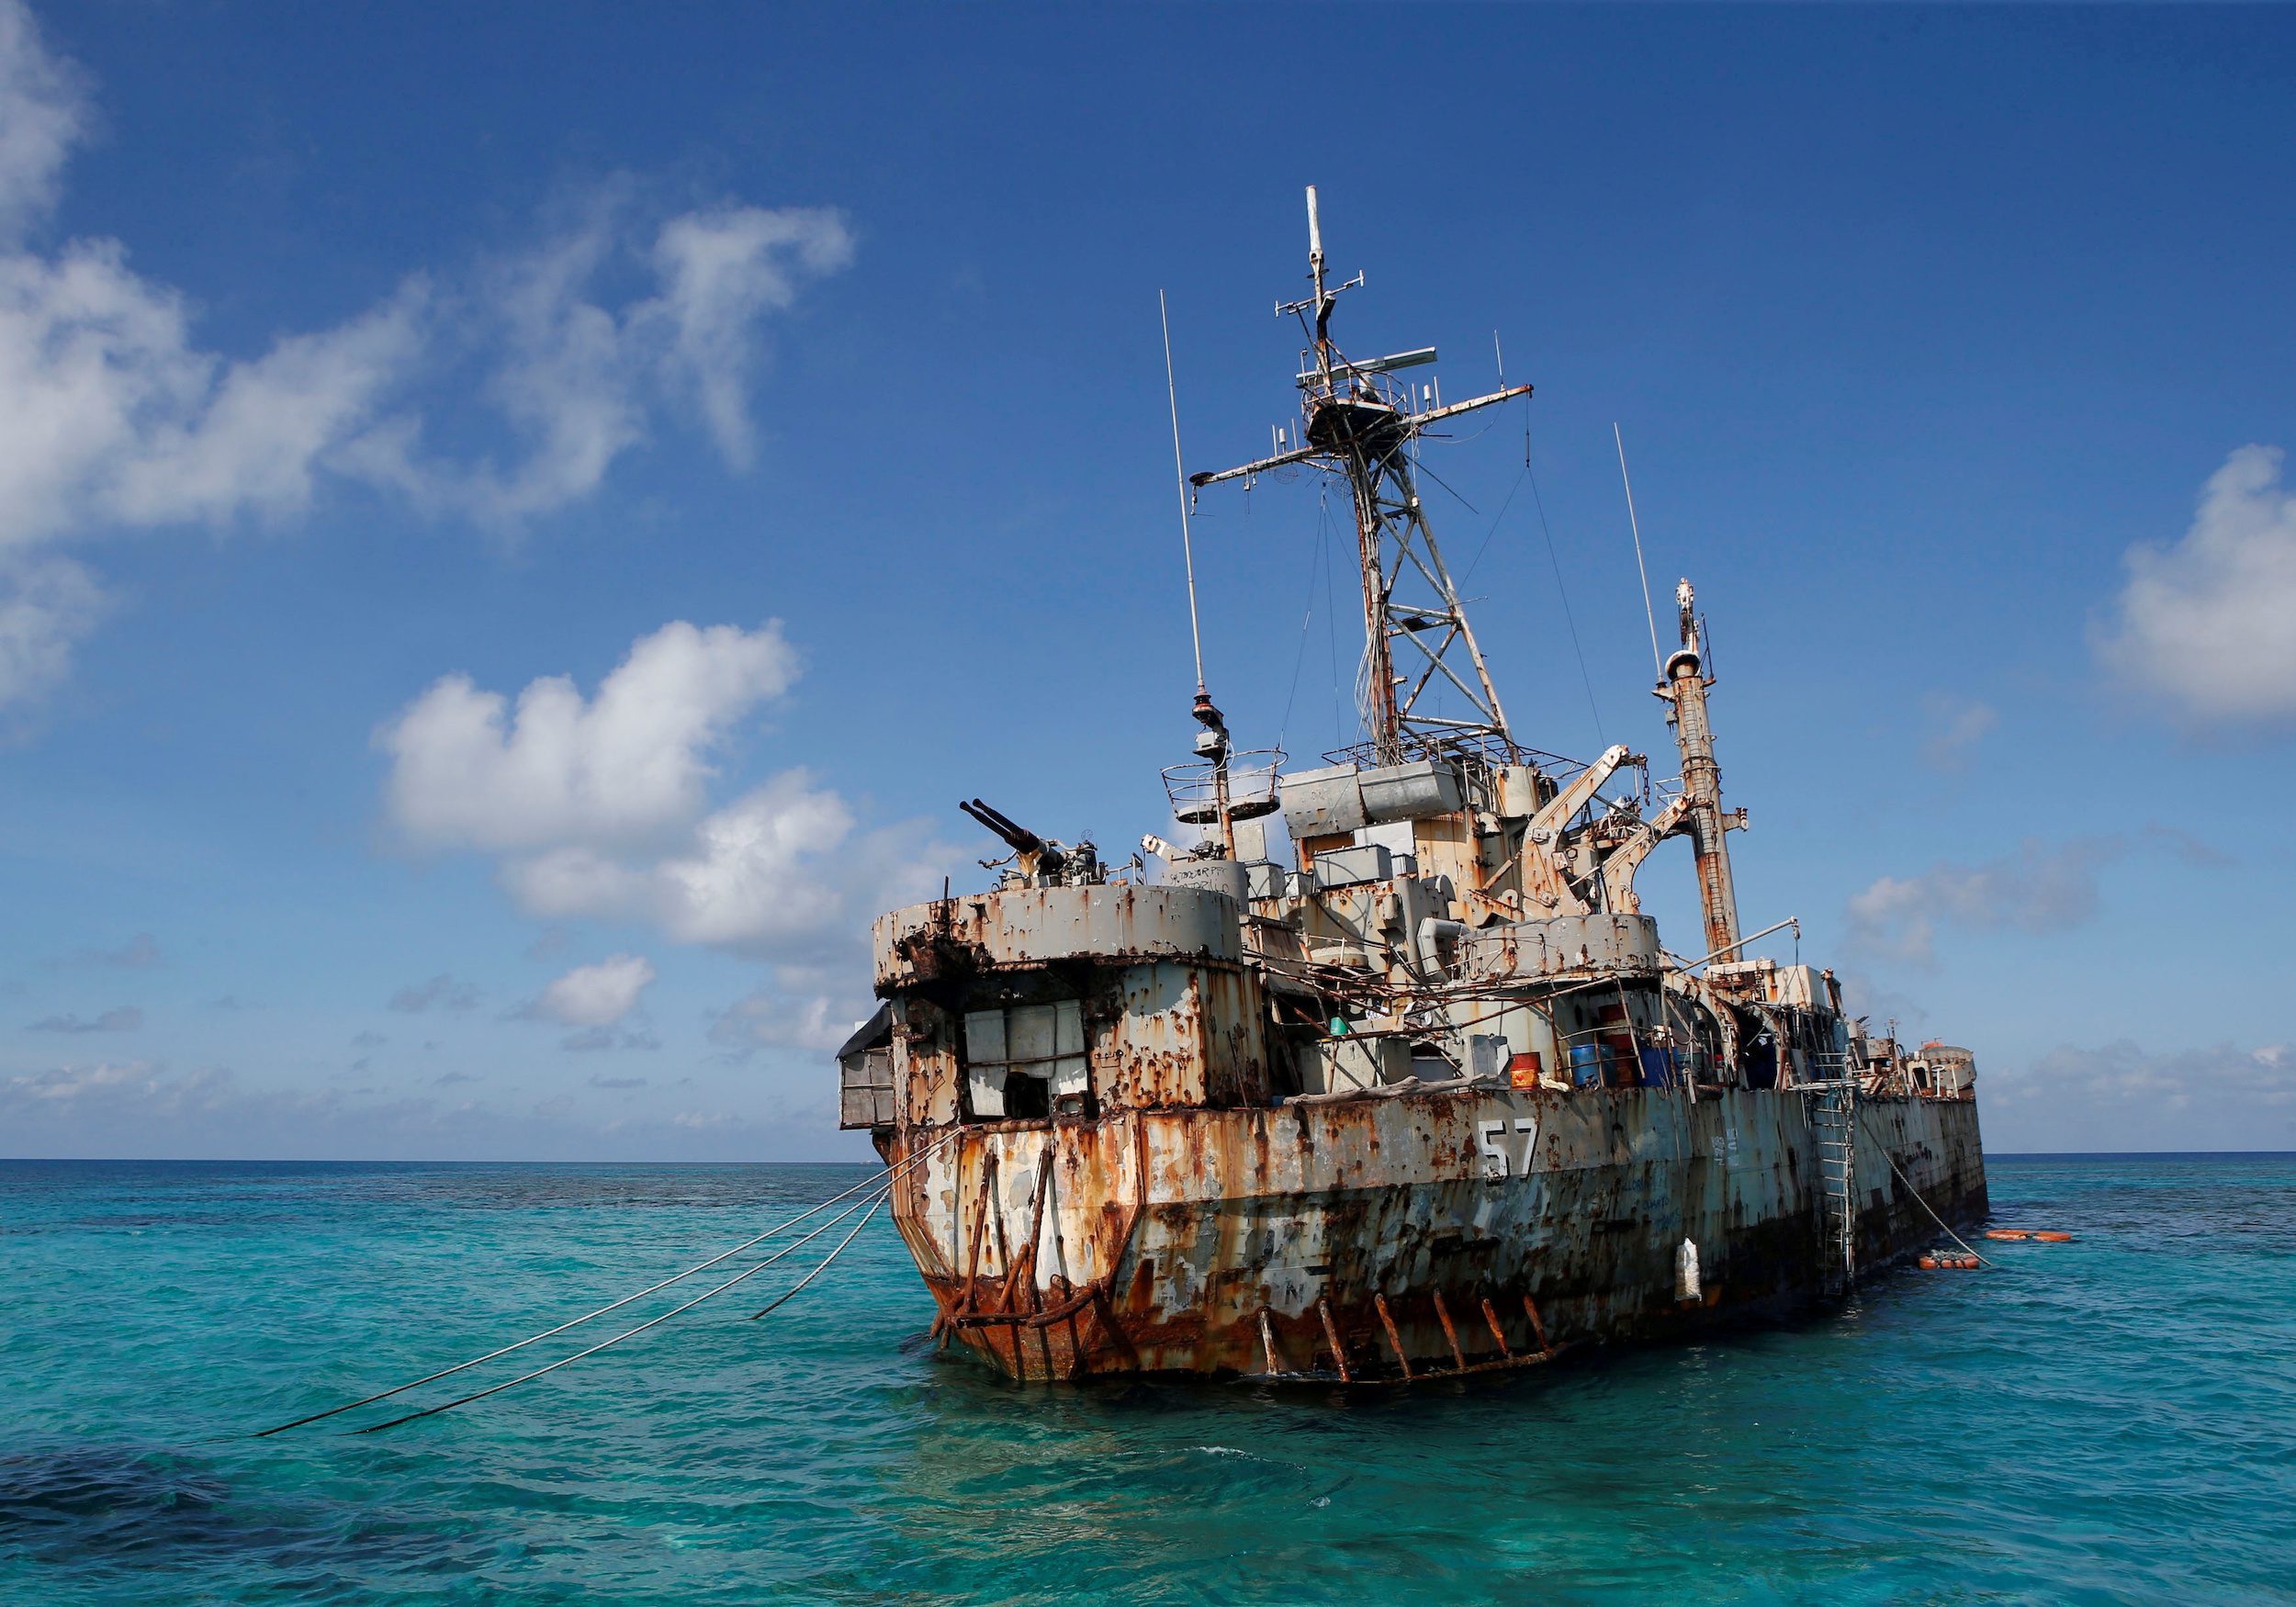 The BRP Sierra Madre, a marooned transport ship which Philippine Marines live on as a military outpost, is pictured in the disputed Second Thomas Shoal, part of the Spratly Islands in the South China Sea March 30, 2014. REUTERS/Erik De Castro